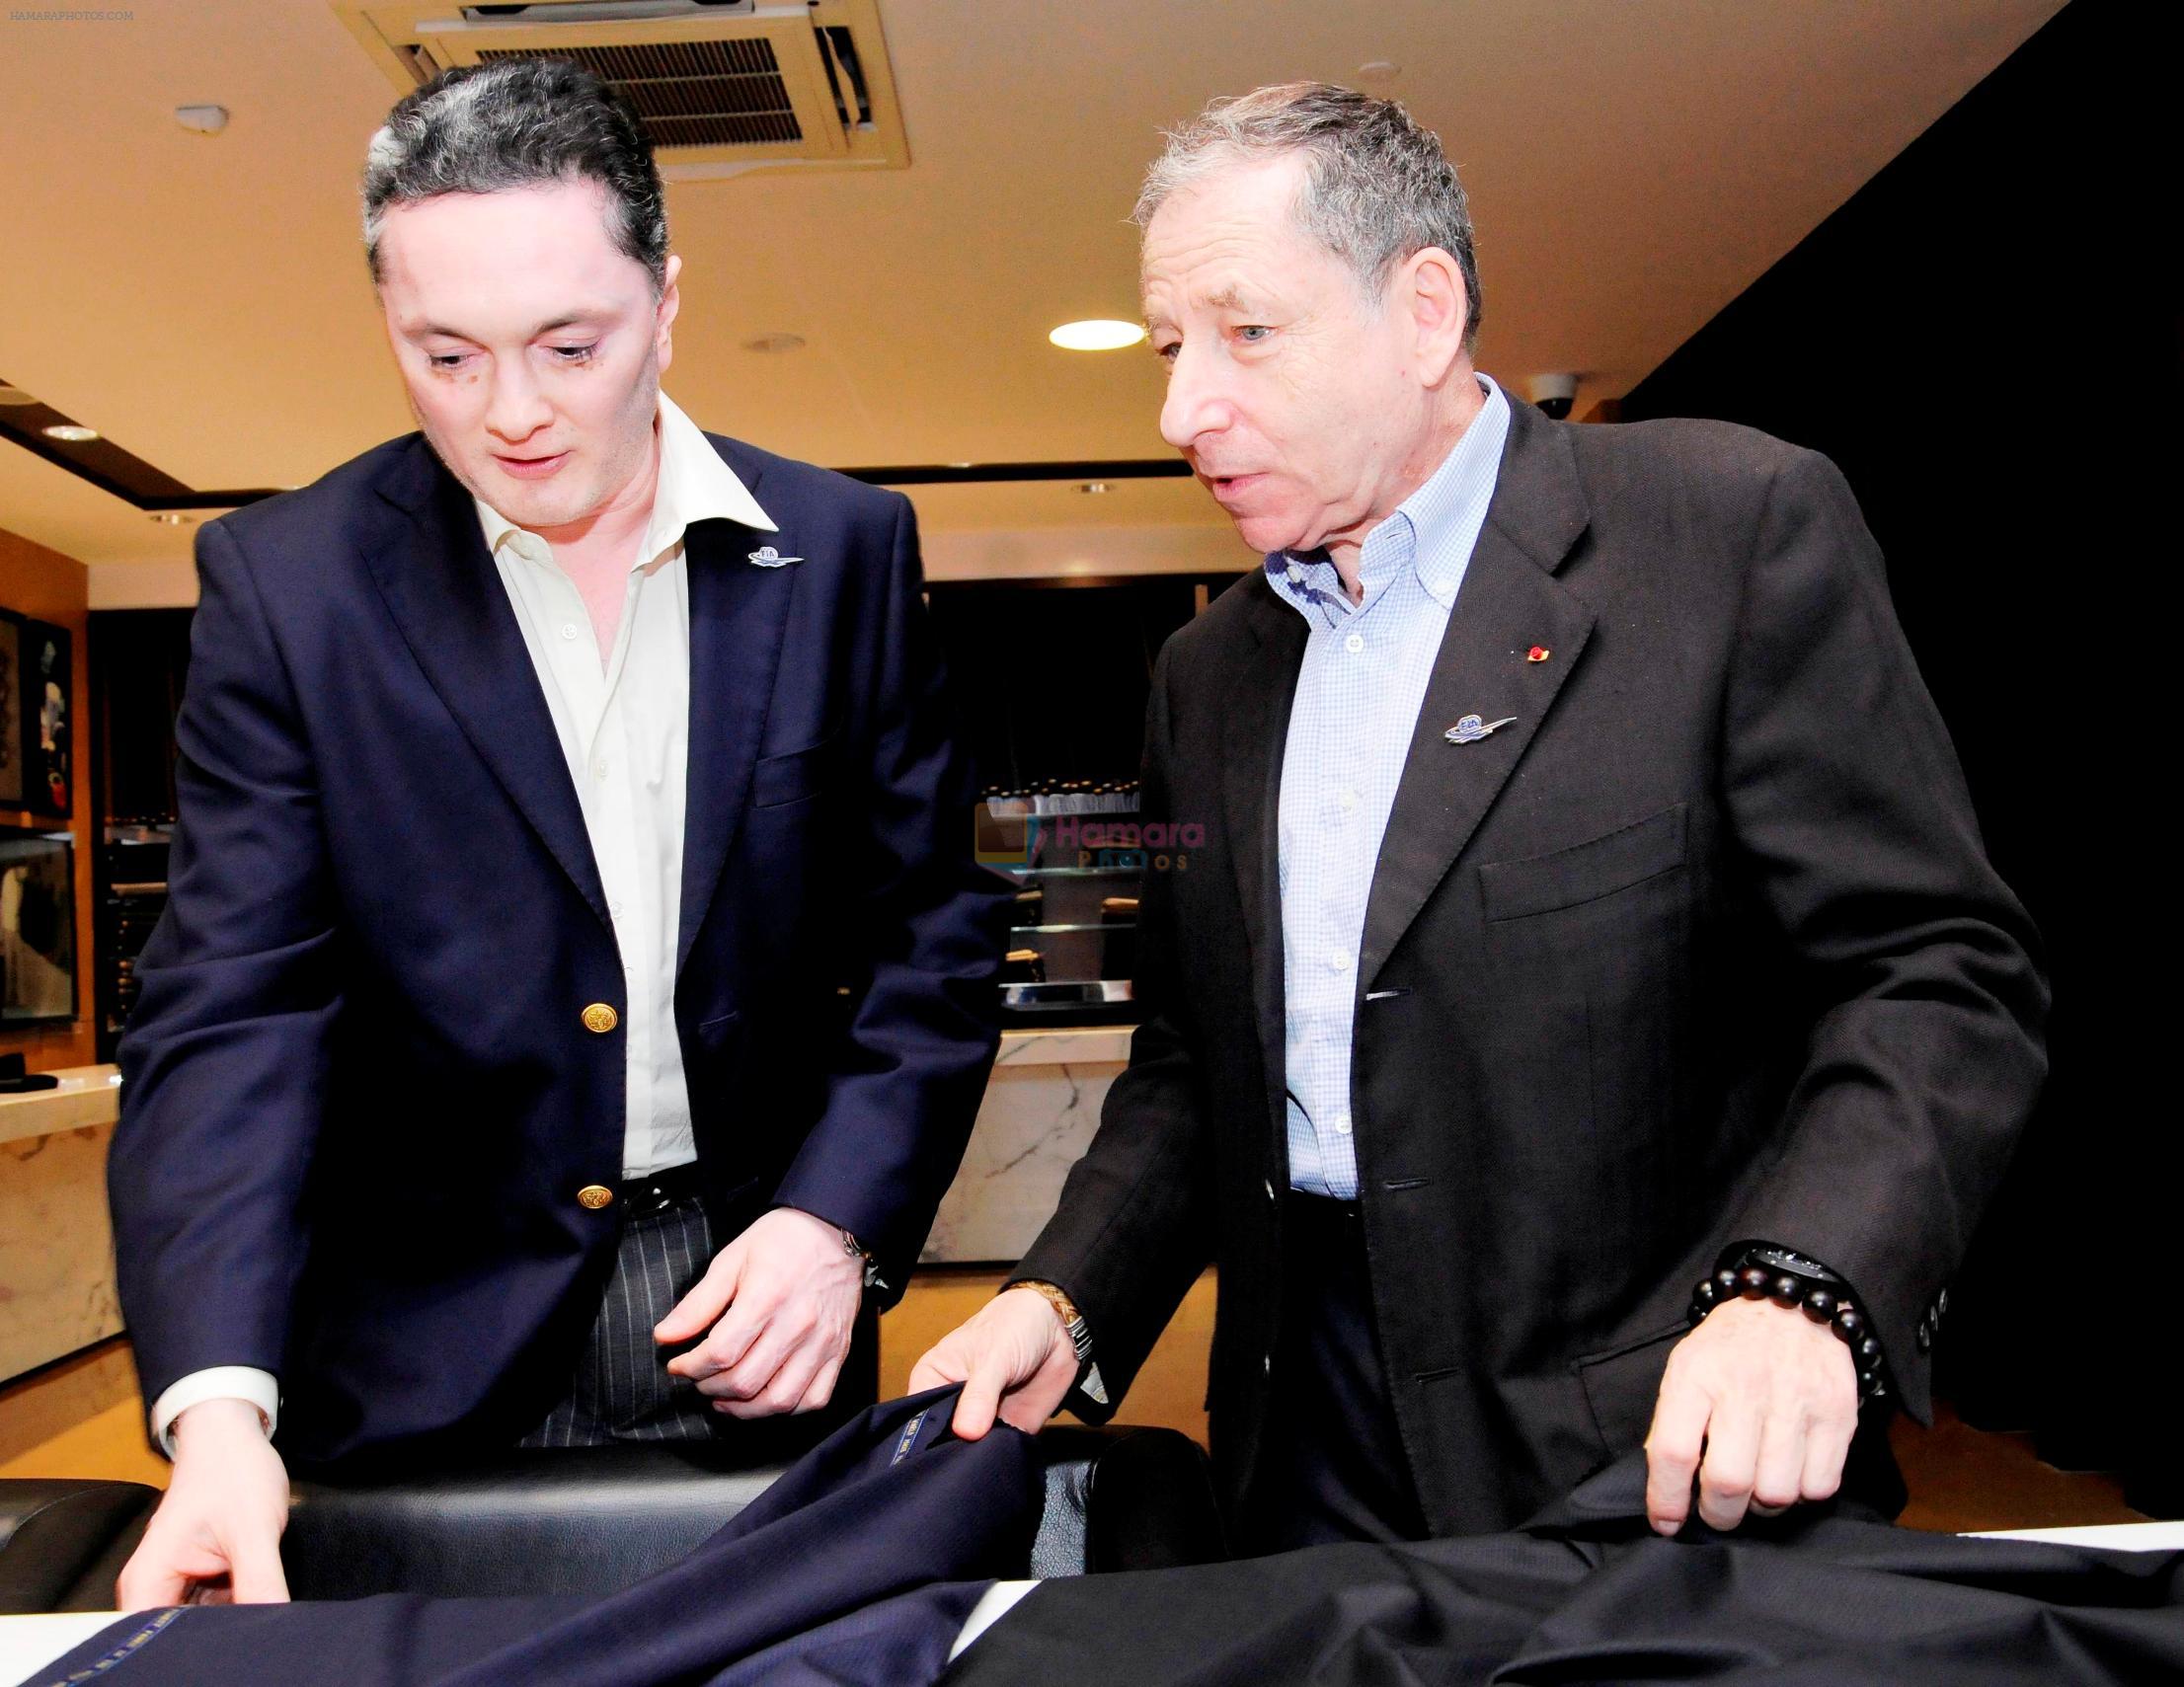 Mr Singhania and Mr Todt at The Raymond Shop